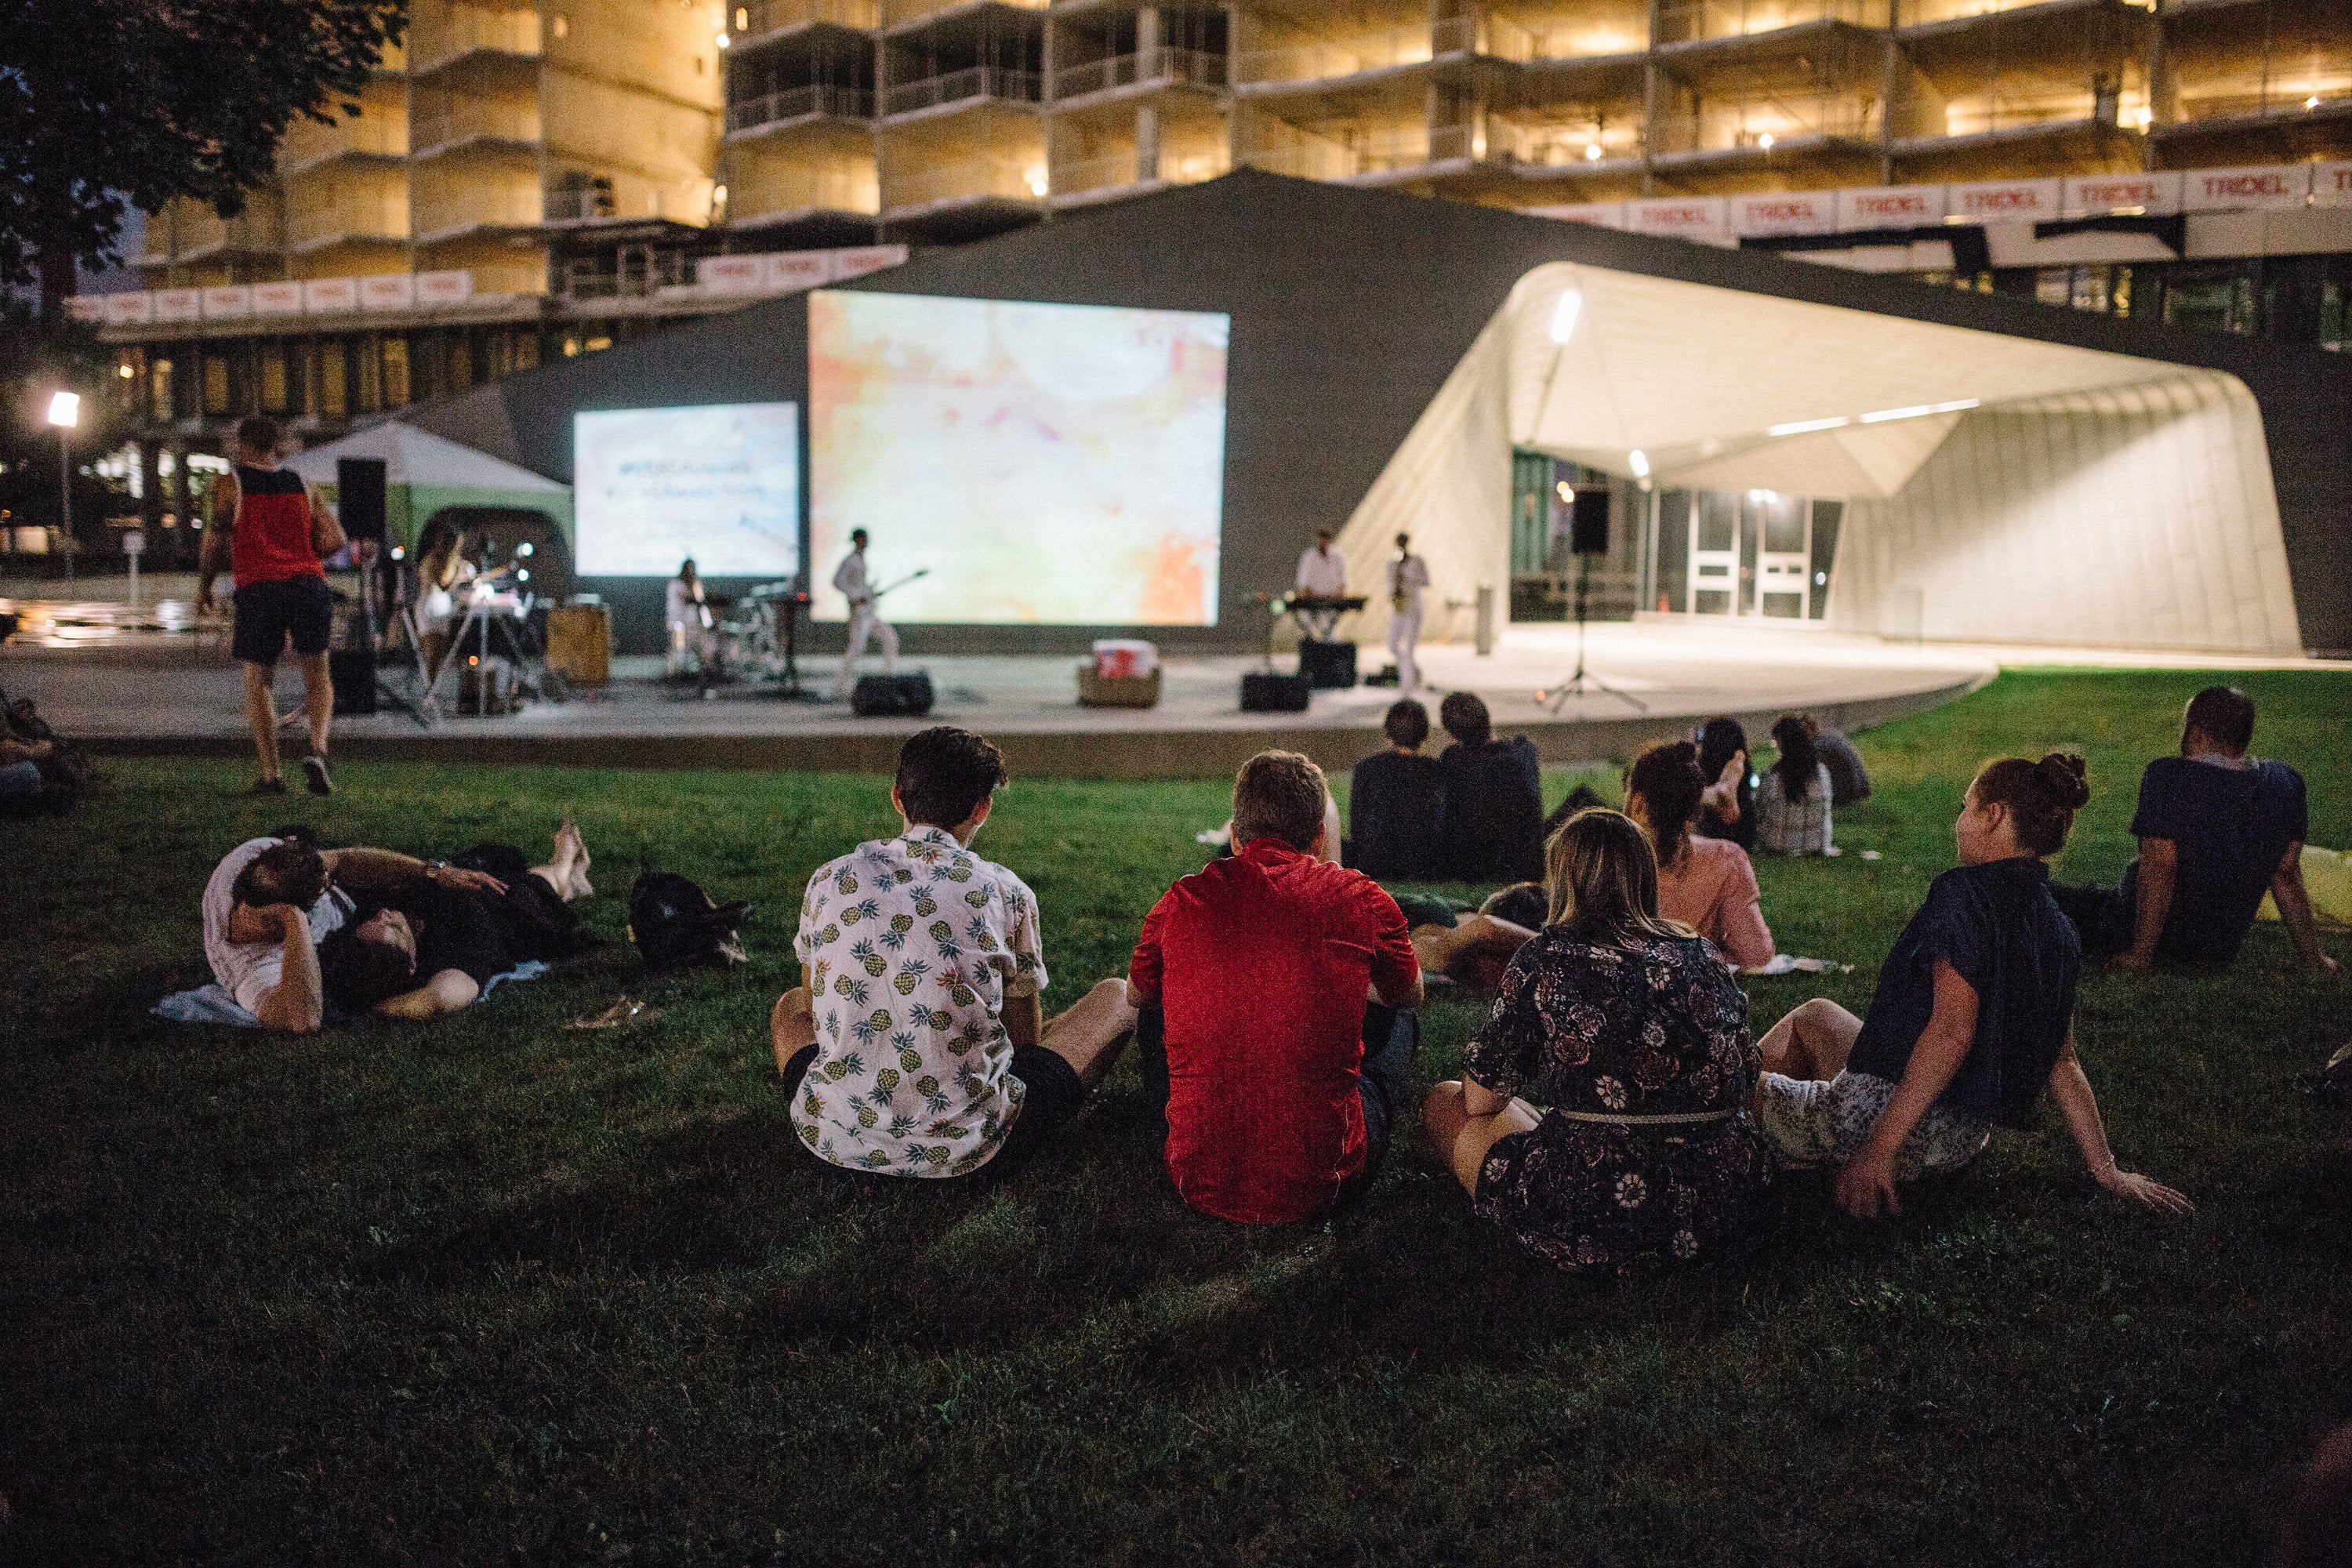 An audience watching audio/visual performance, Versa, at Sherbourne Common.